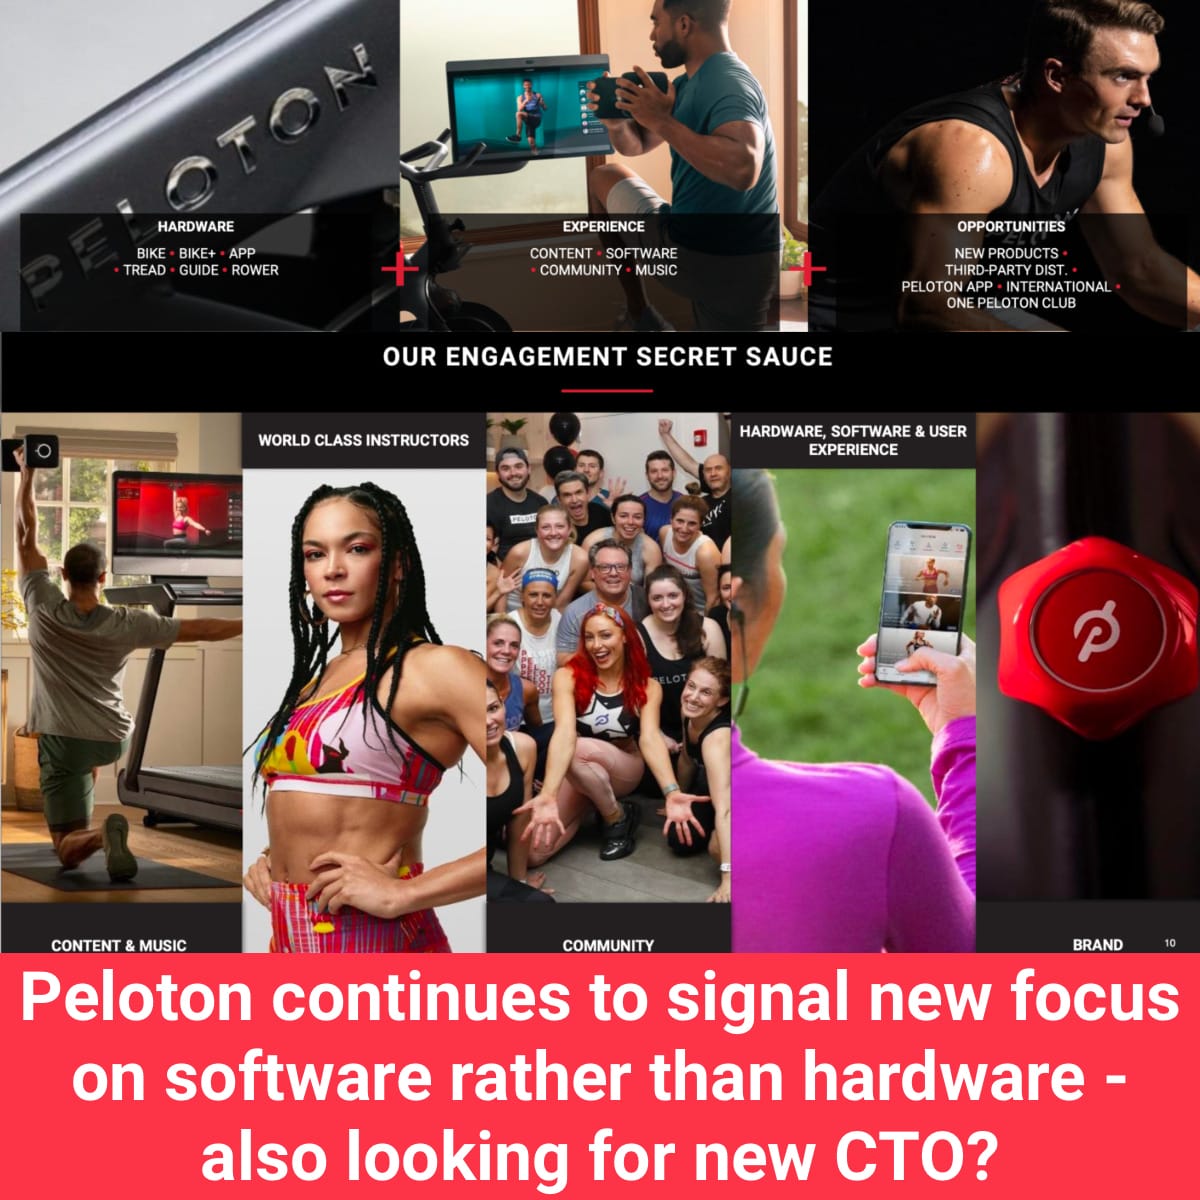 Peloton continues to signal shift from focus on hardware to